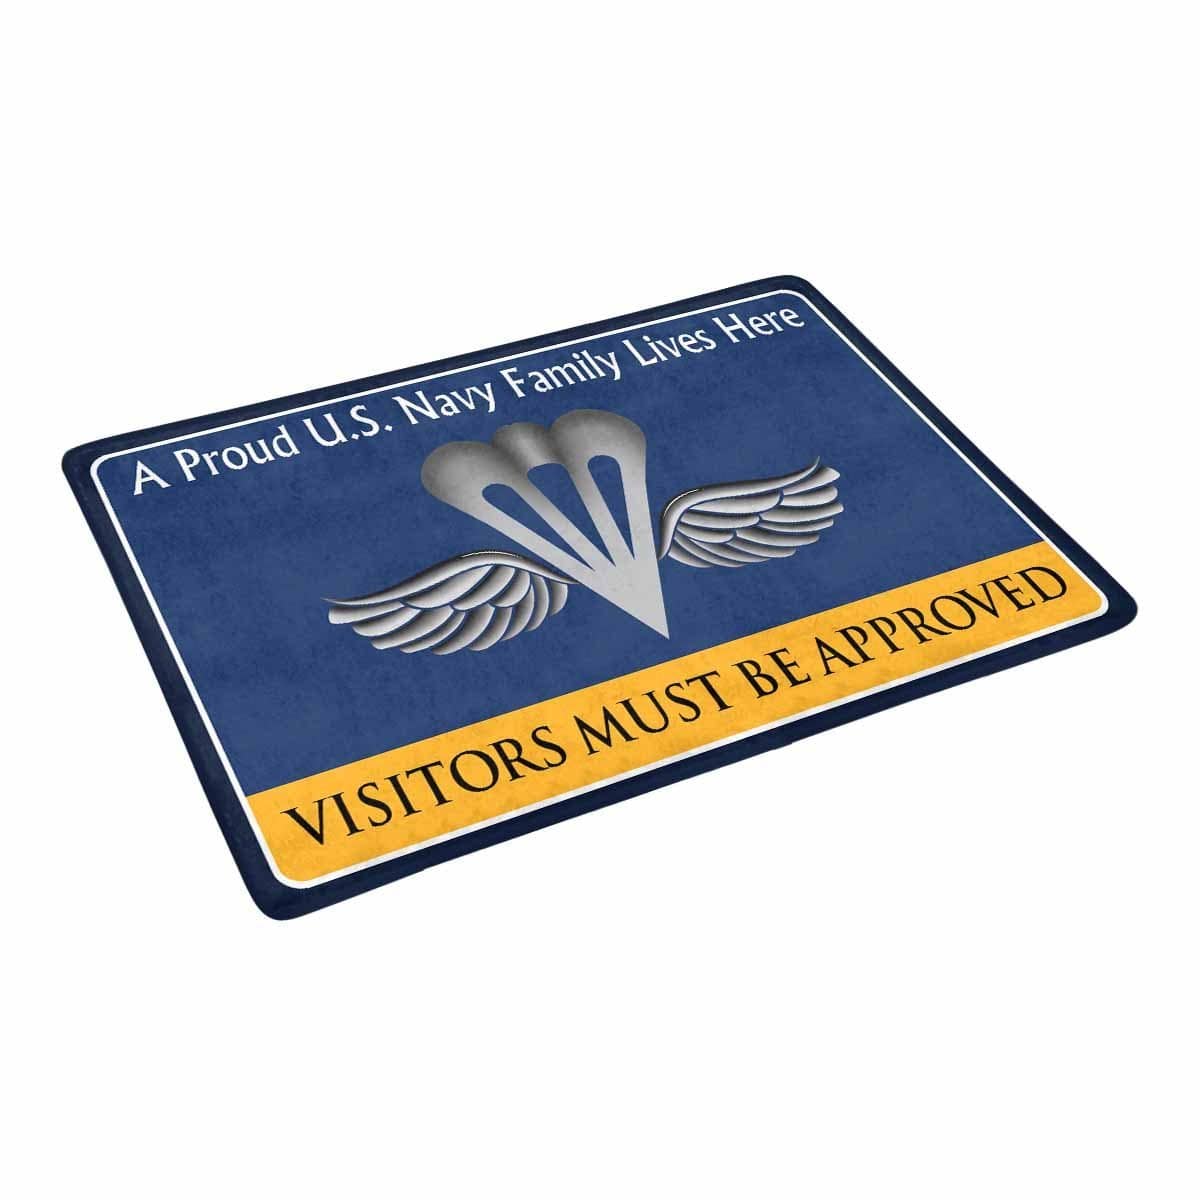 Navy Aircrew Survival Equipmentman Navy PR Family Doormat - Visitors must be approved (23,6 inches x 15,7 inches)-Doormat-Navy-Rate-Veterans Nation